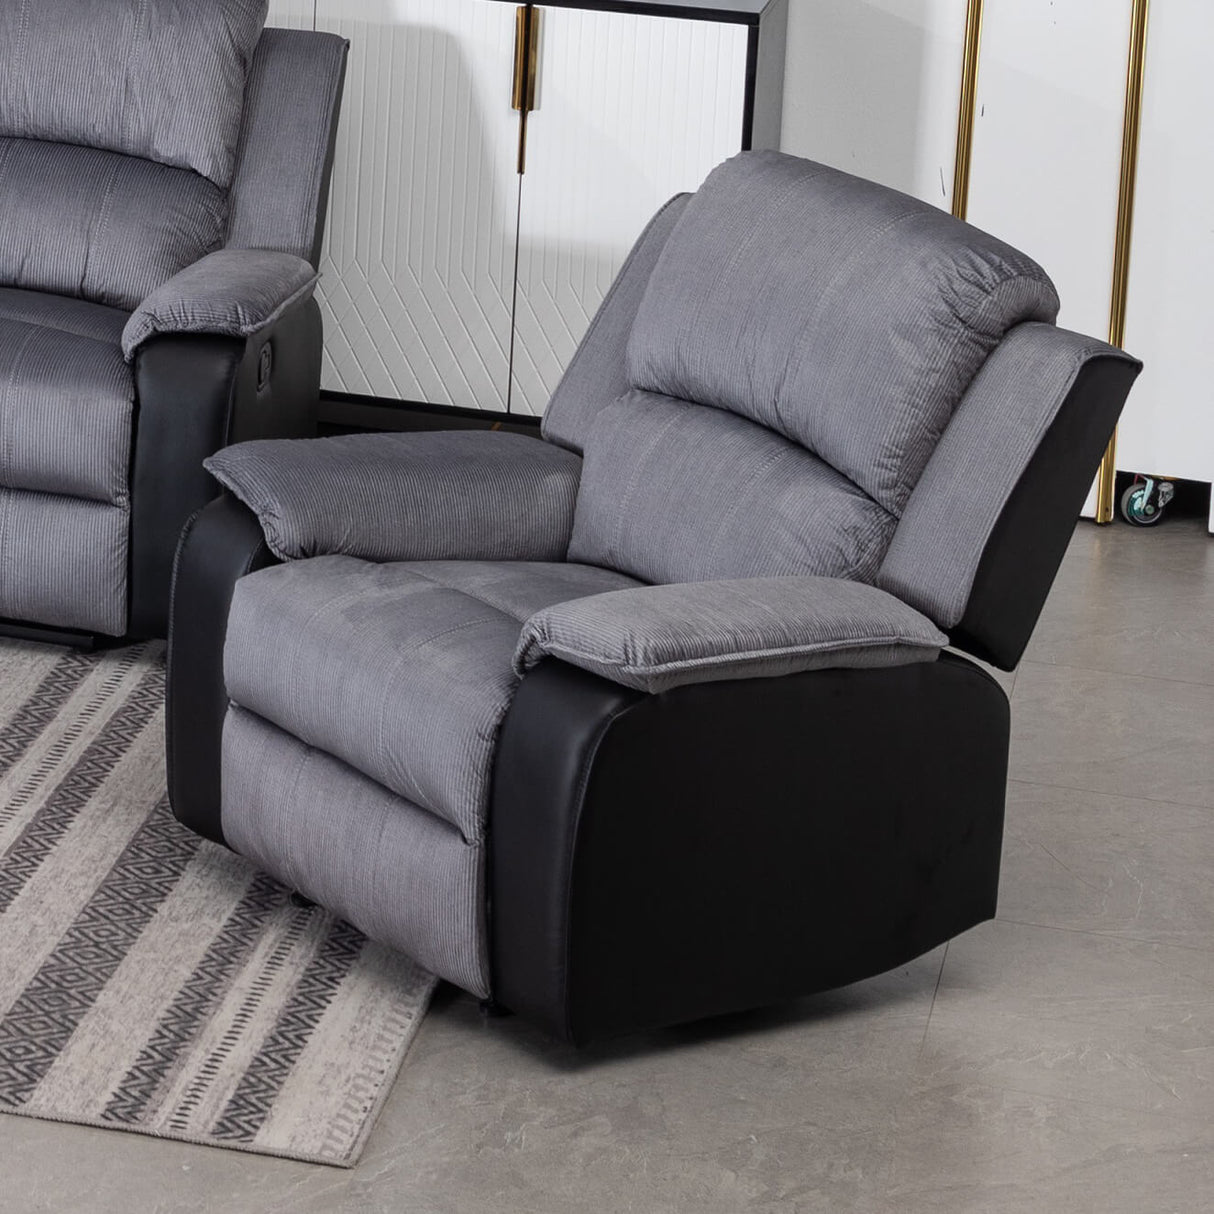 Earlsden Recliner Grey Fabric And Black PU 1 Seater